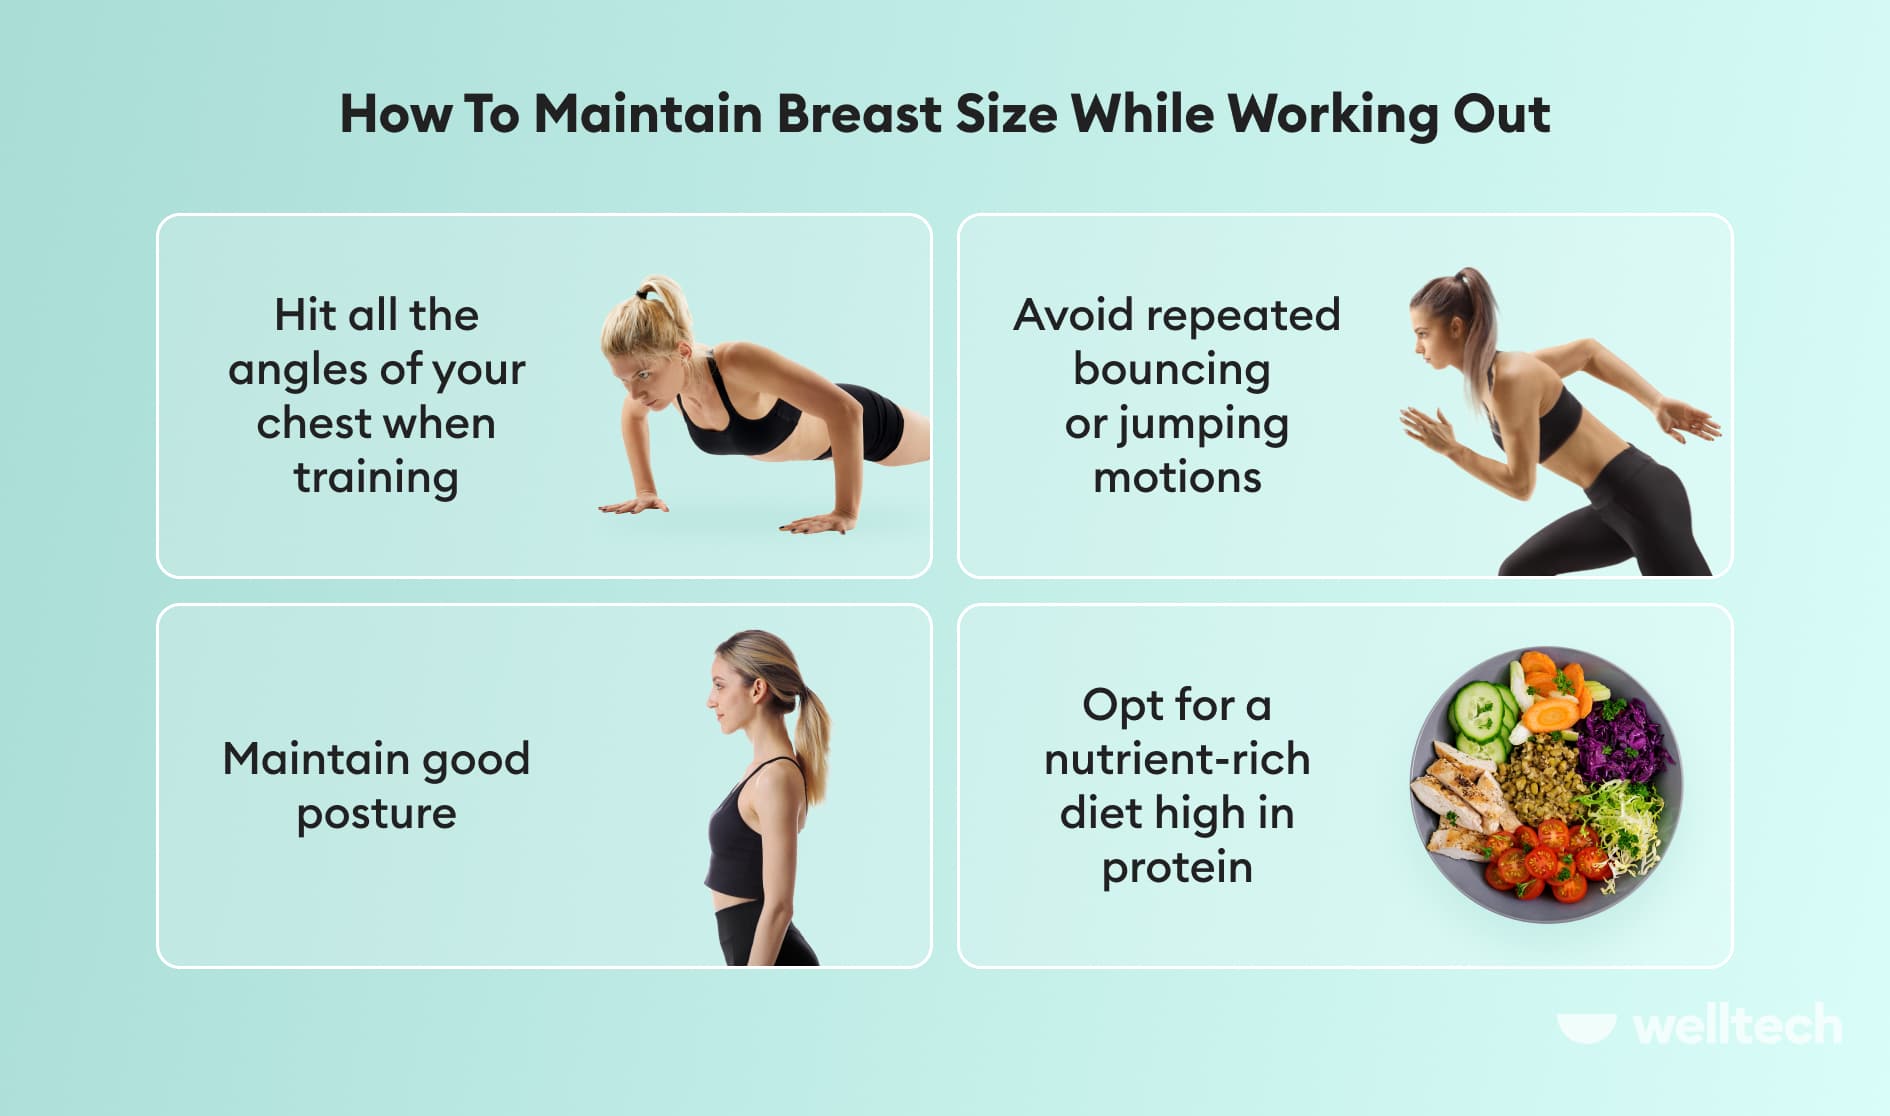 four tips on How To Maintain Breast Size While Working Out_How to lose weight without losing boobs